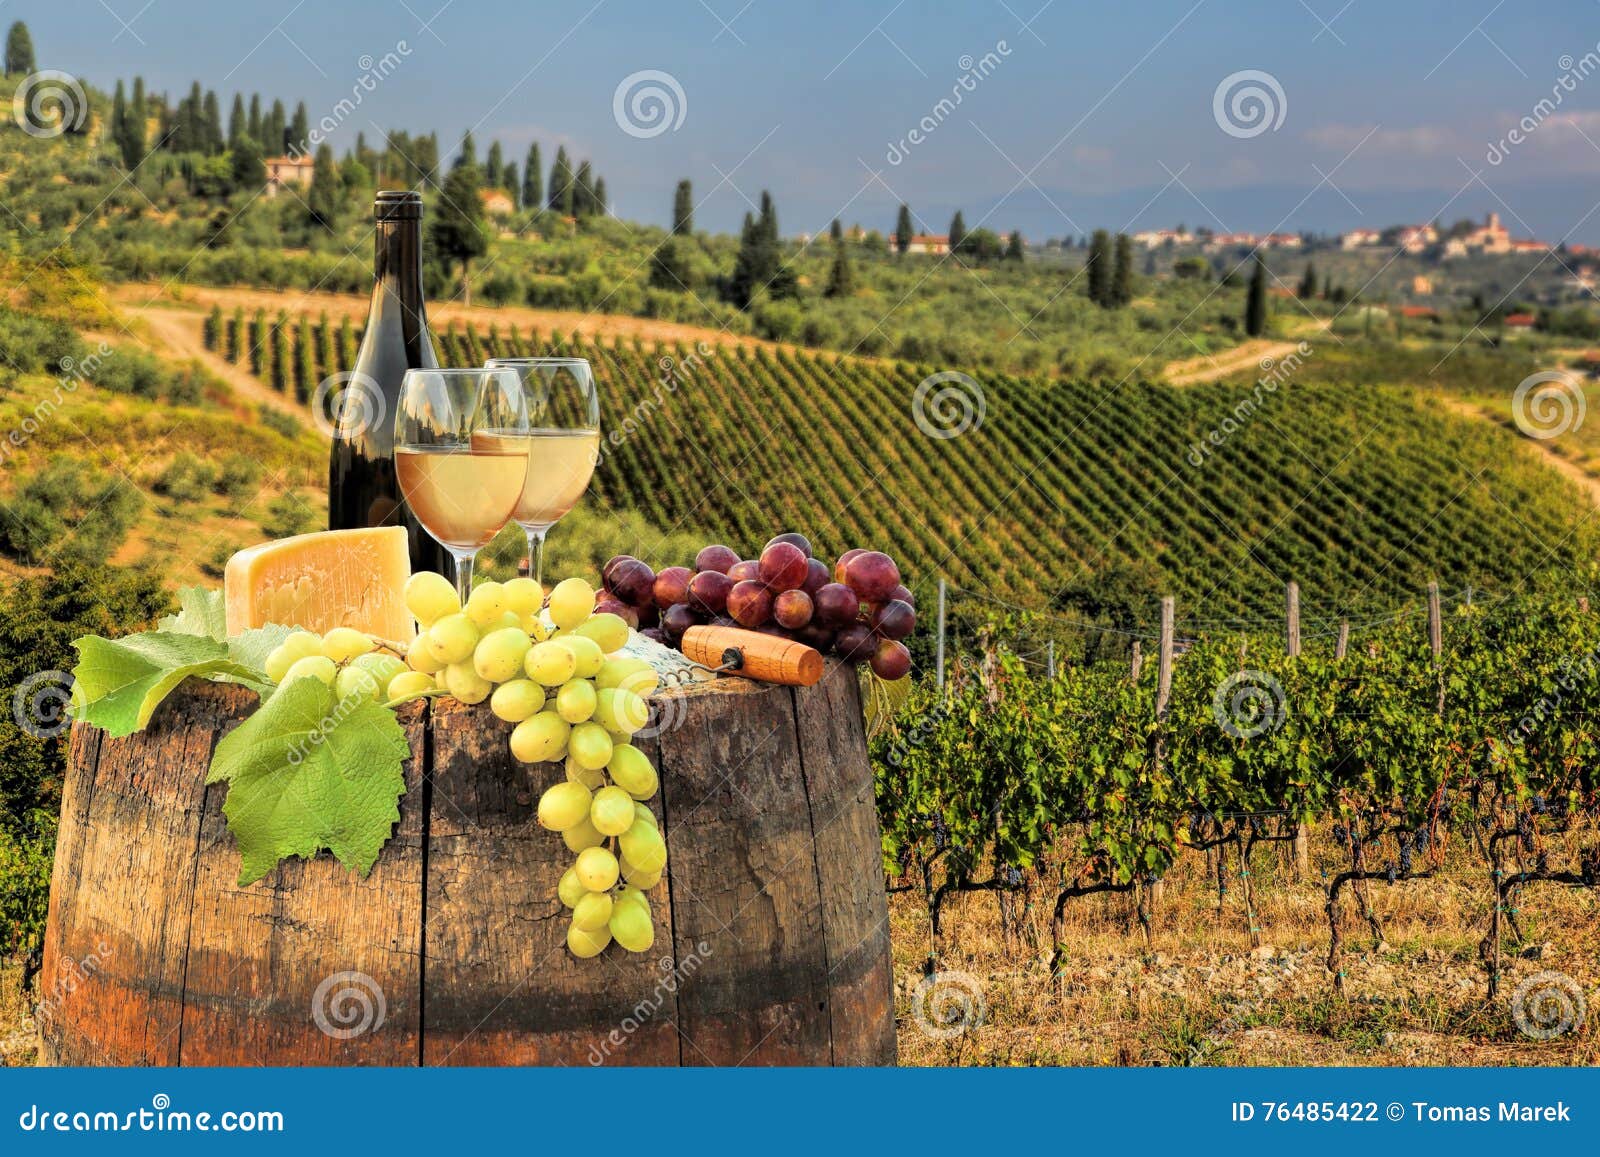 Small Size Lunarable Winery Cutting Board Apple Green Decorative Tempered Glass Cutting and Serving Board White Wine with Cask on Vineyard at Sunset in Chianti Tuscany Italy